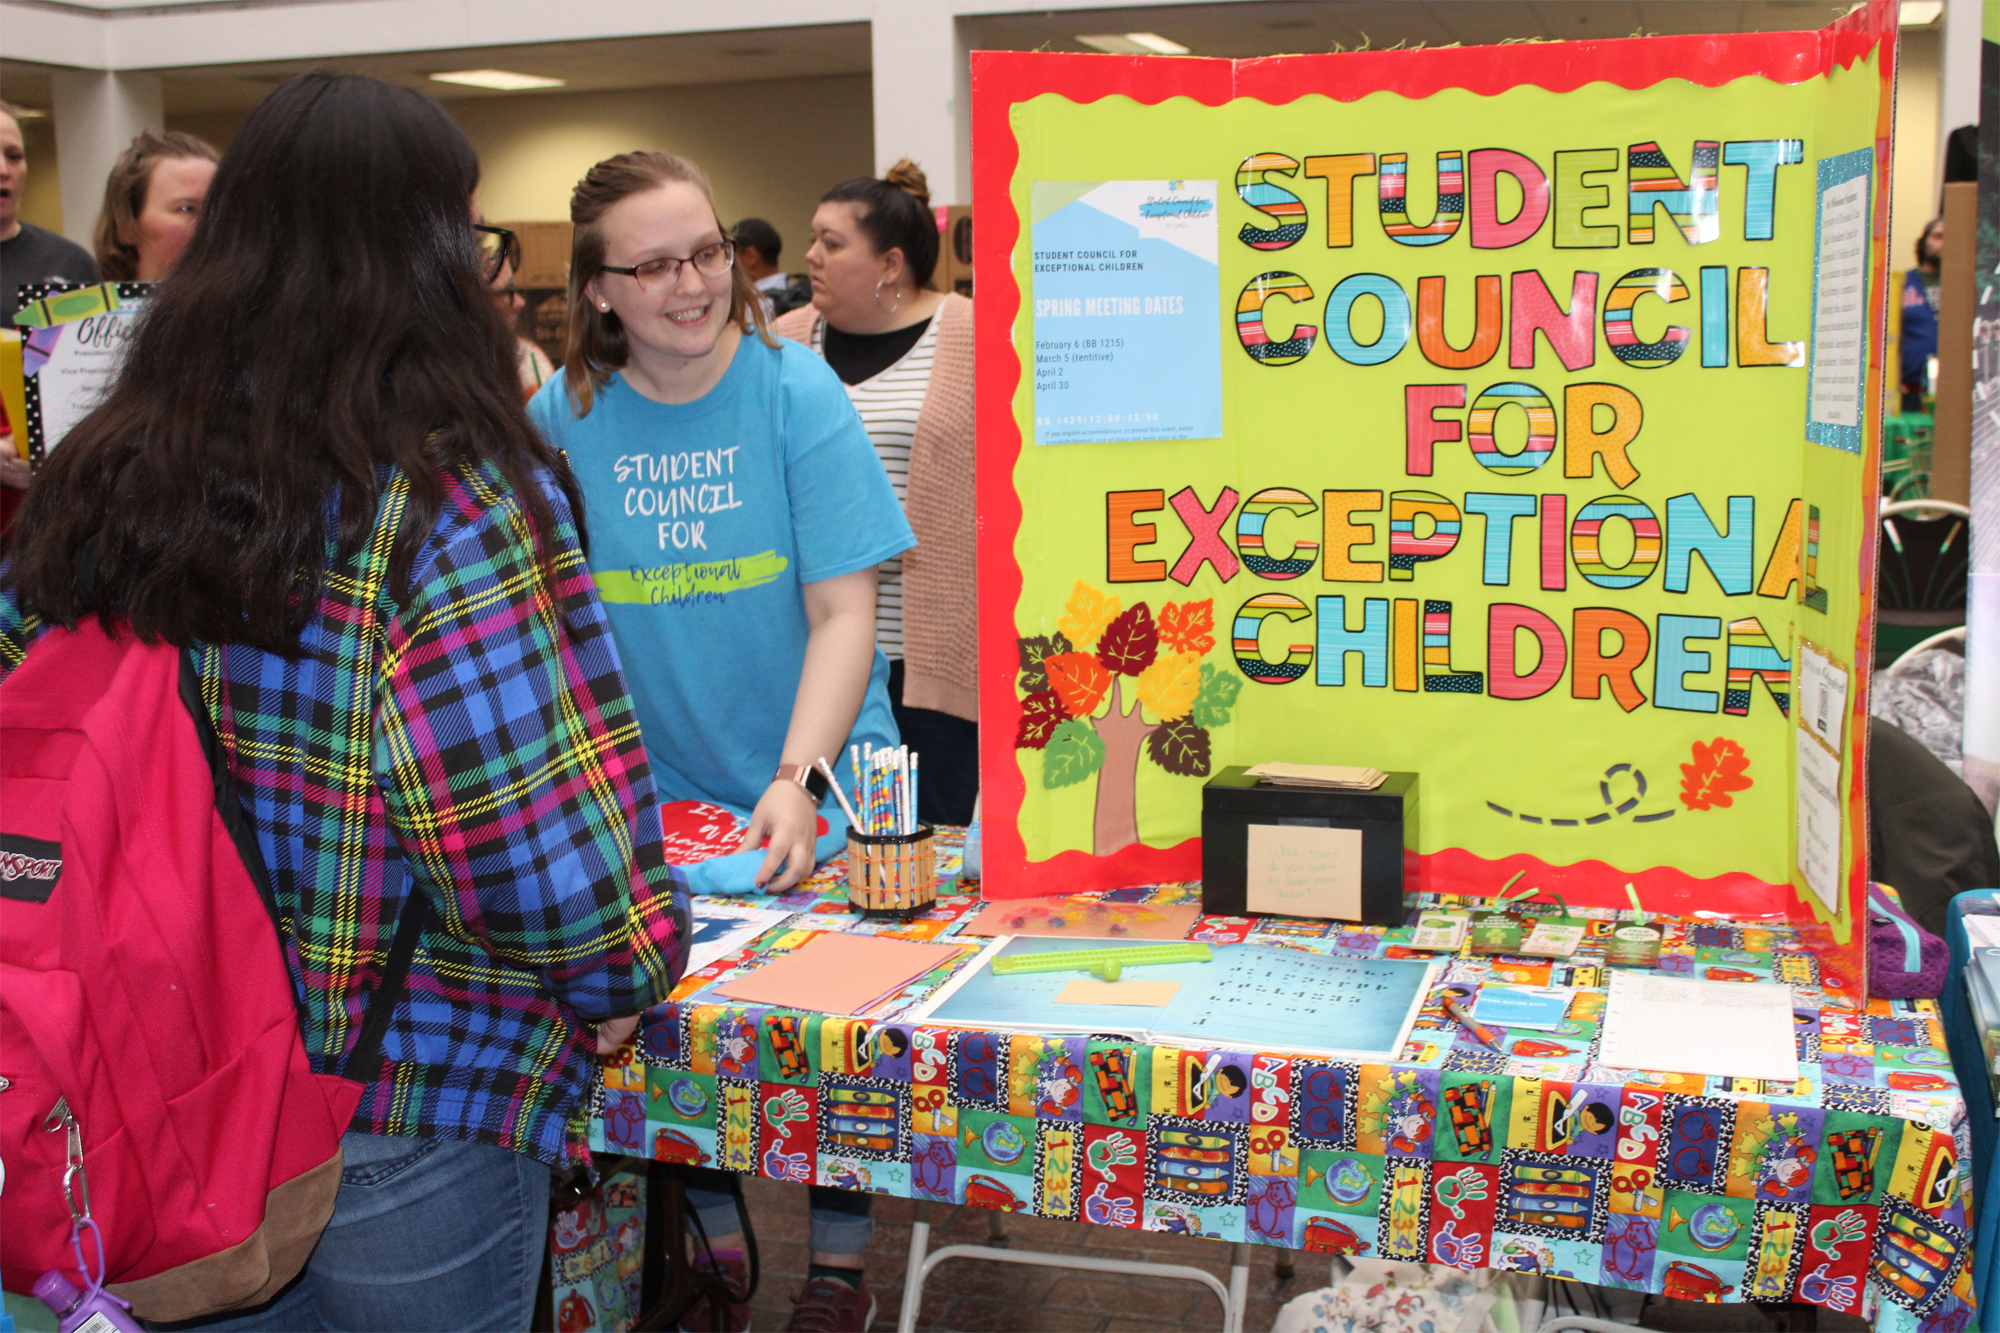 PHOTO: A representative from the student council for exceptional children talks to a student about joining their organization. Photo by: The Signal reporter Aimee Kubena.